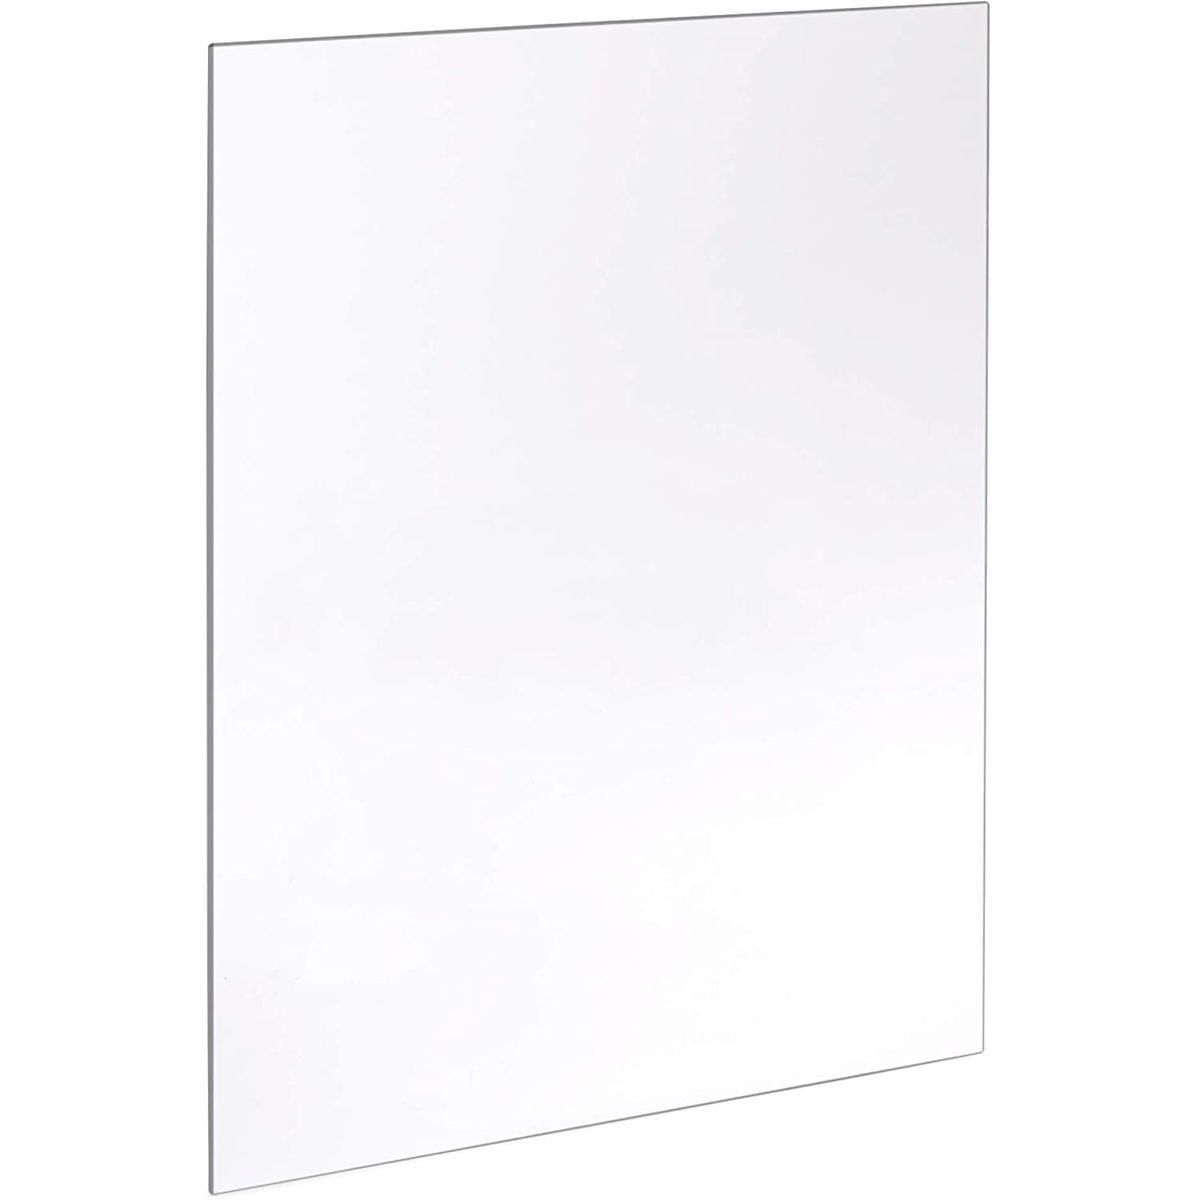 Okuna Outpost Clear Acrylic Sheet Plastic for Picture Frame Glass Replacement 11 x 14 in, 10 Pack 